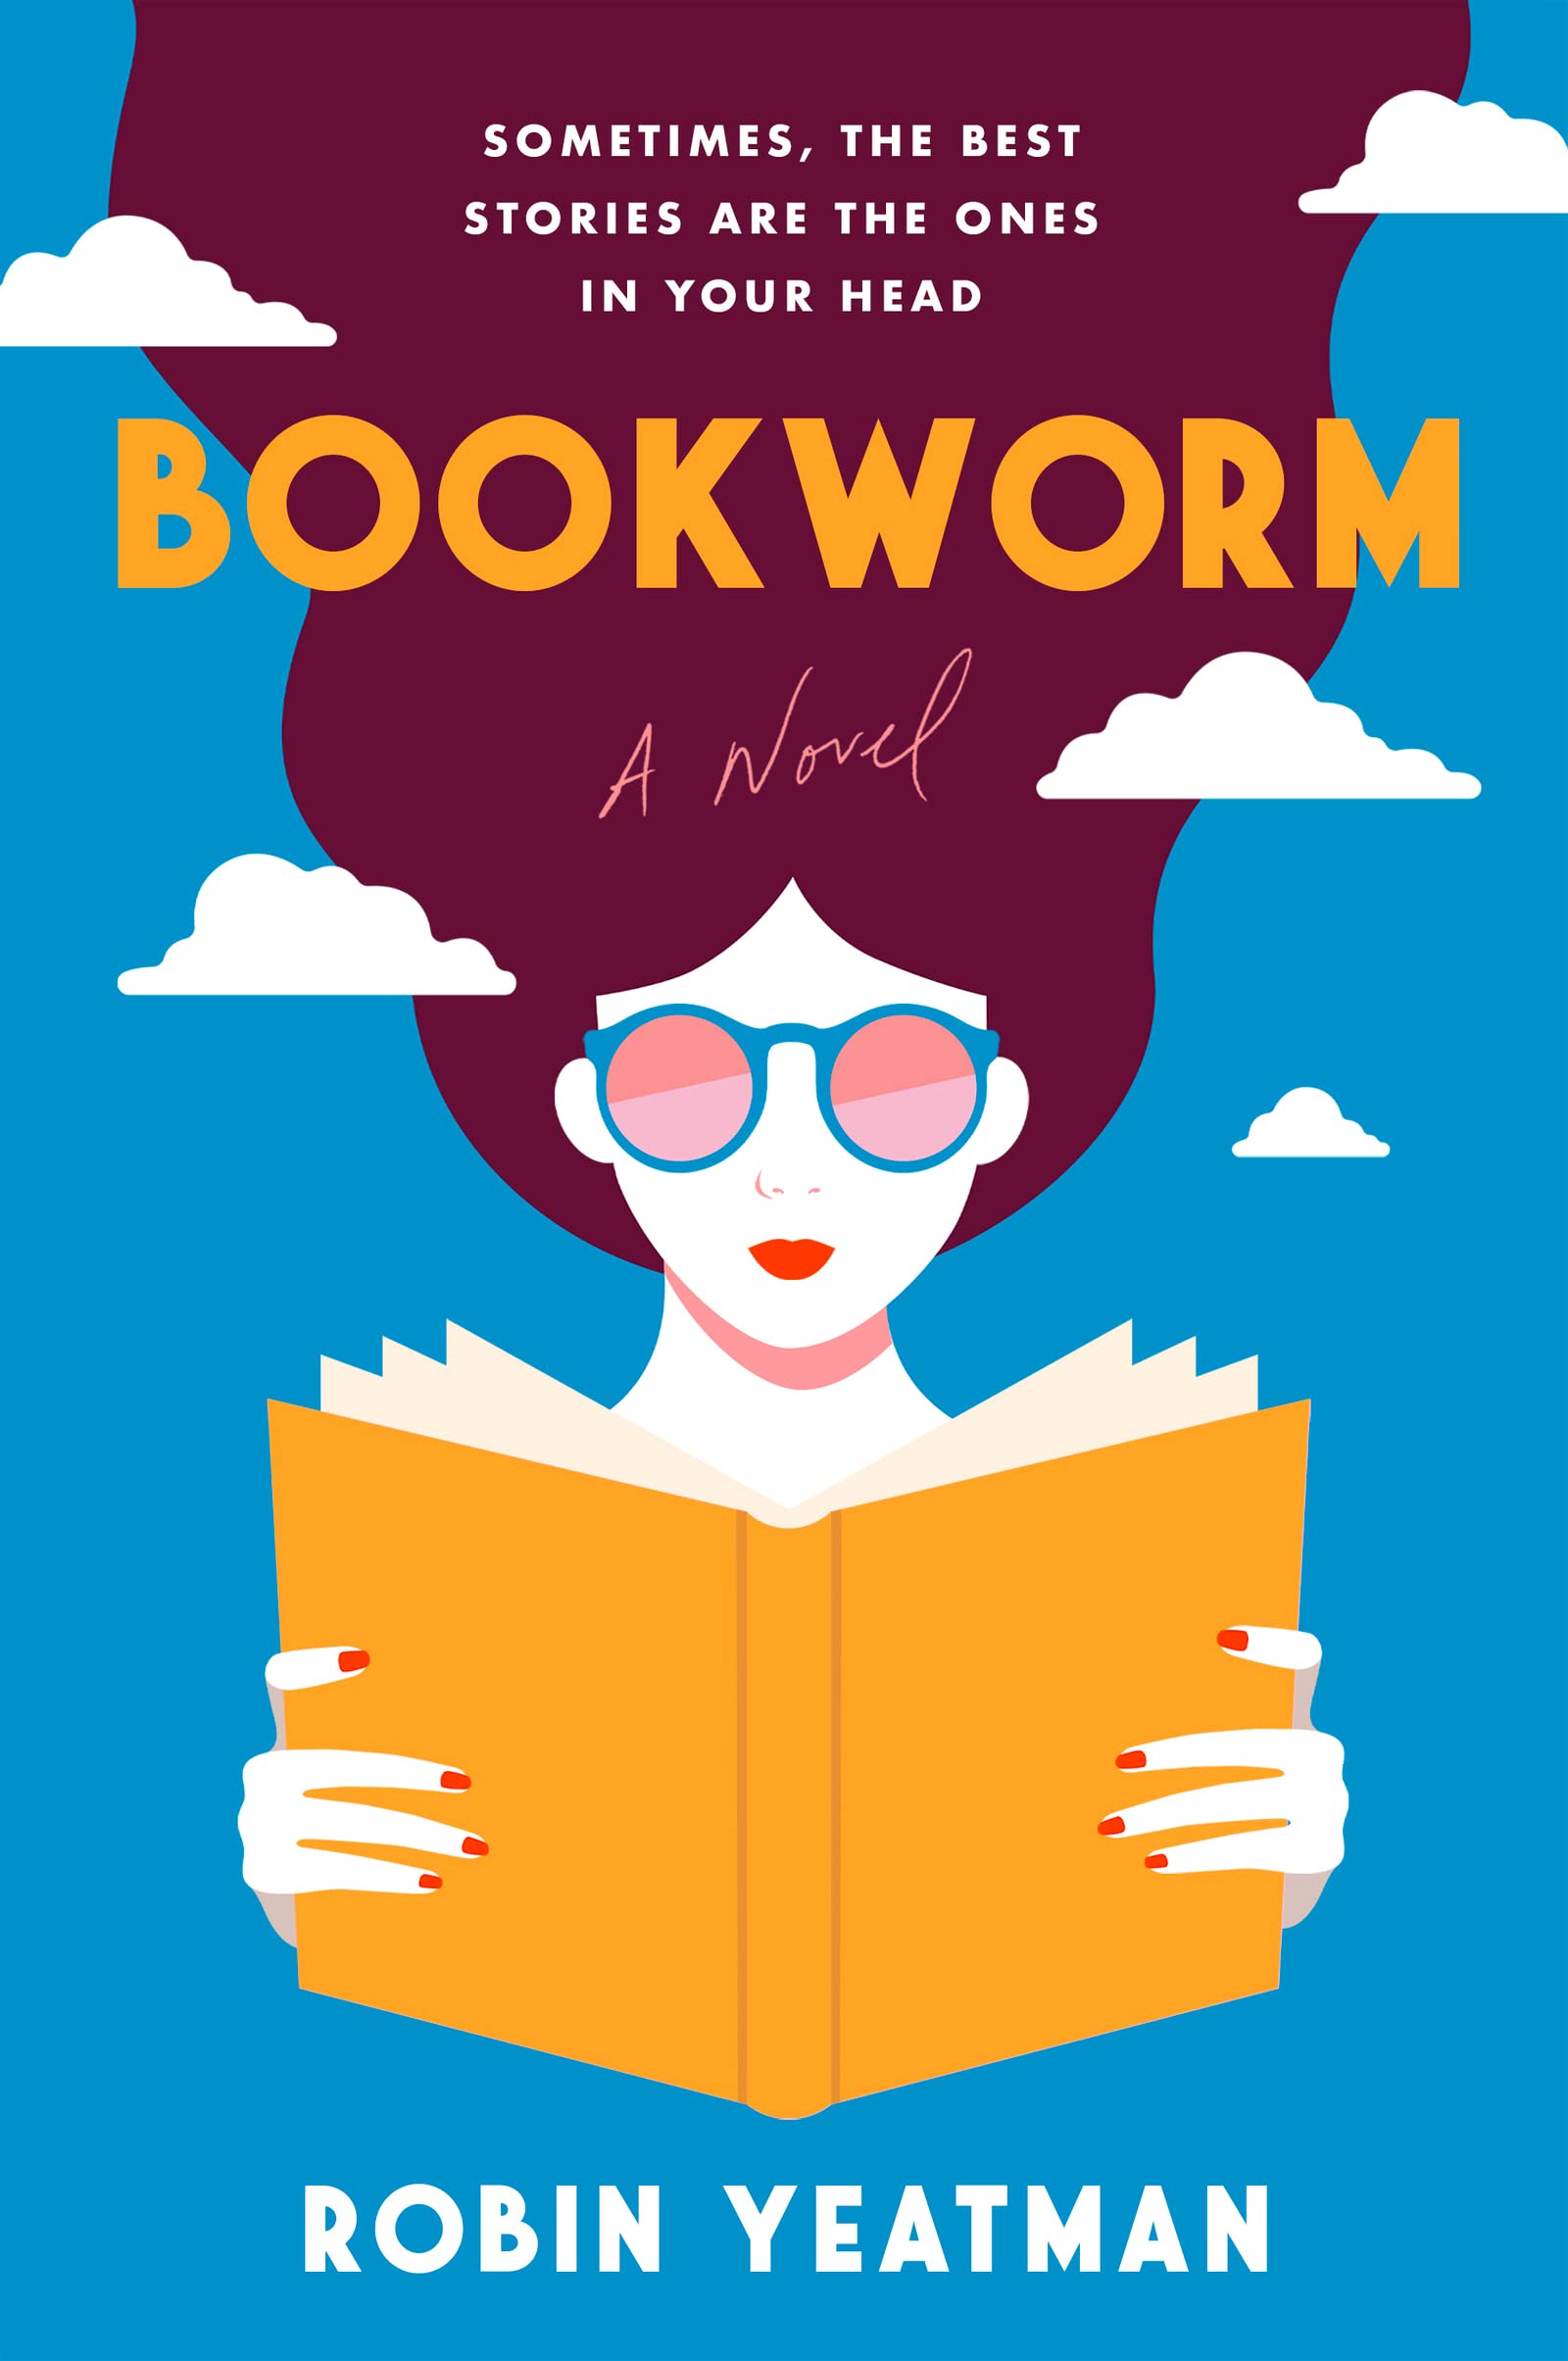 Image for "Bookworm"